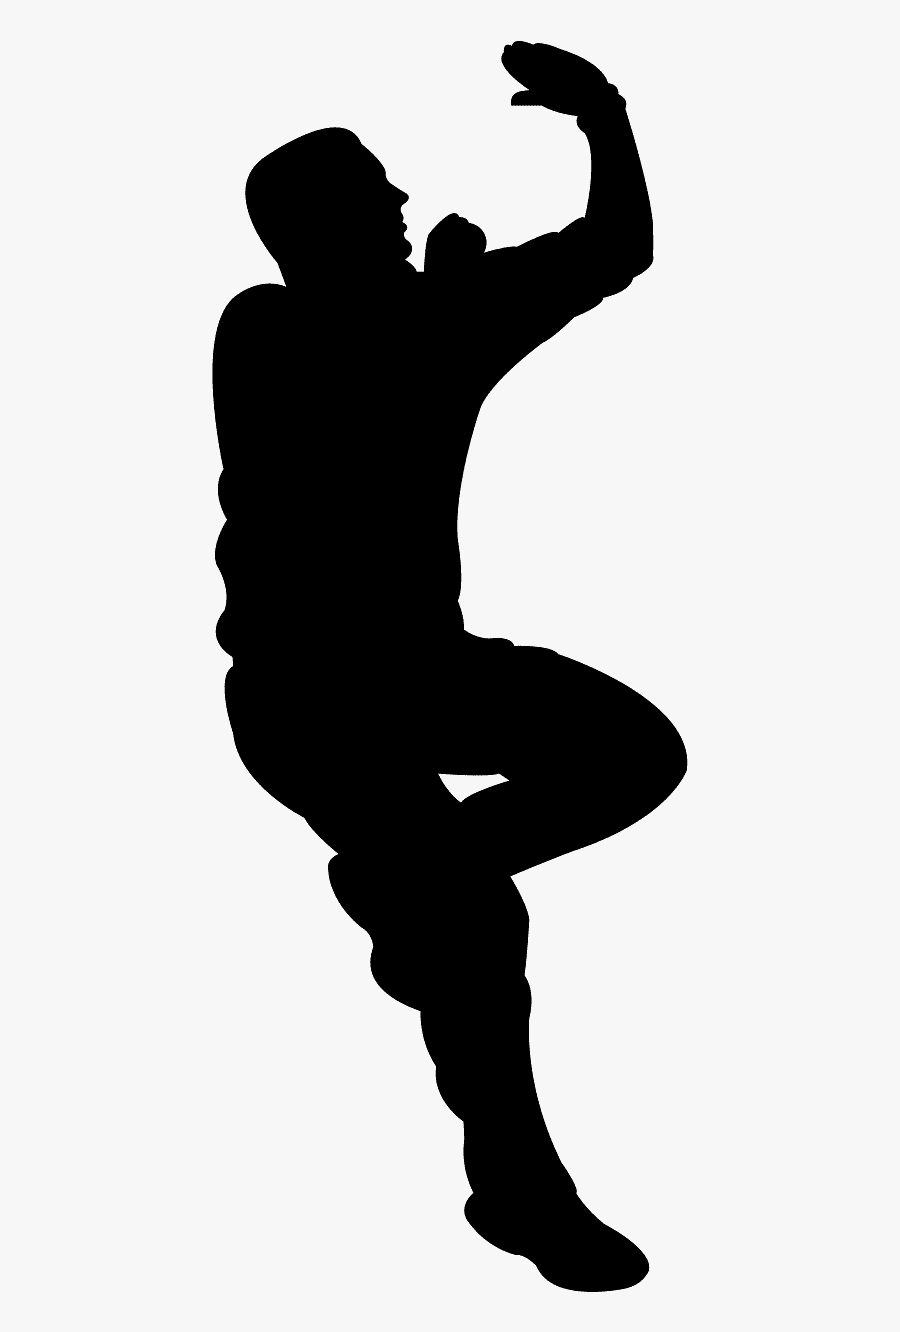 Cricket Bowling Clipart Black And White, Transparent Clipart